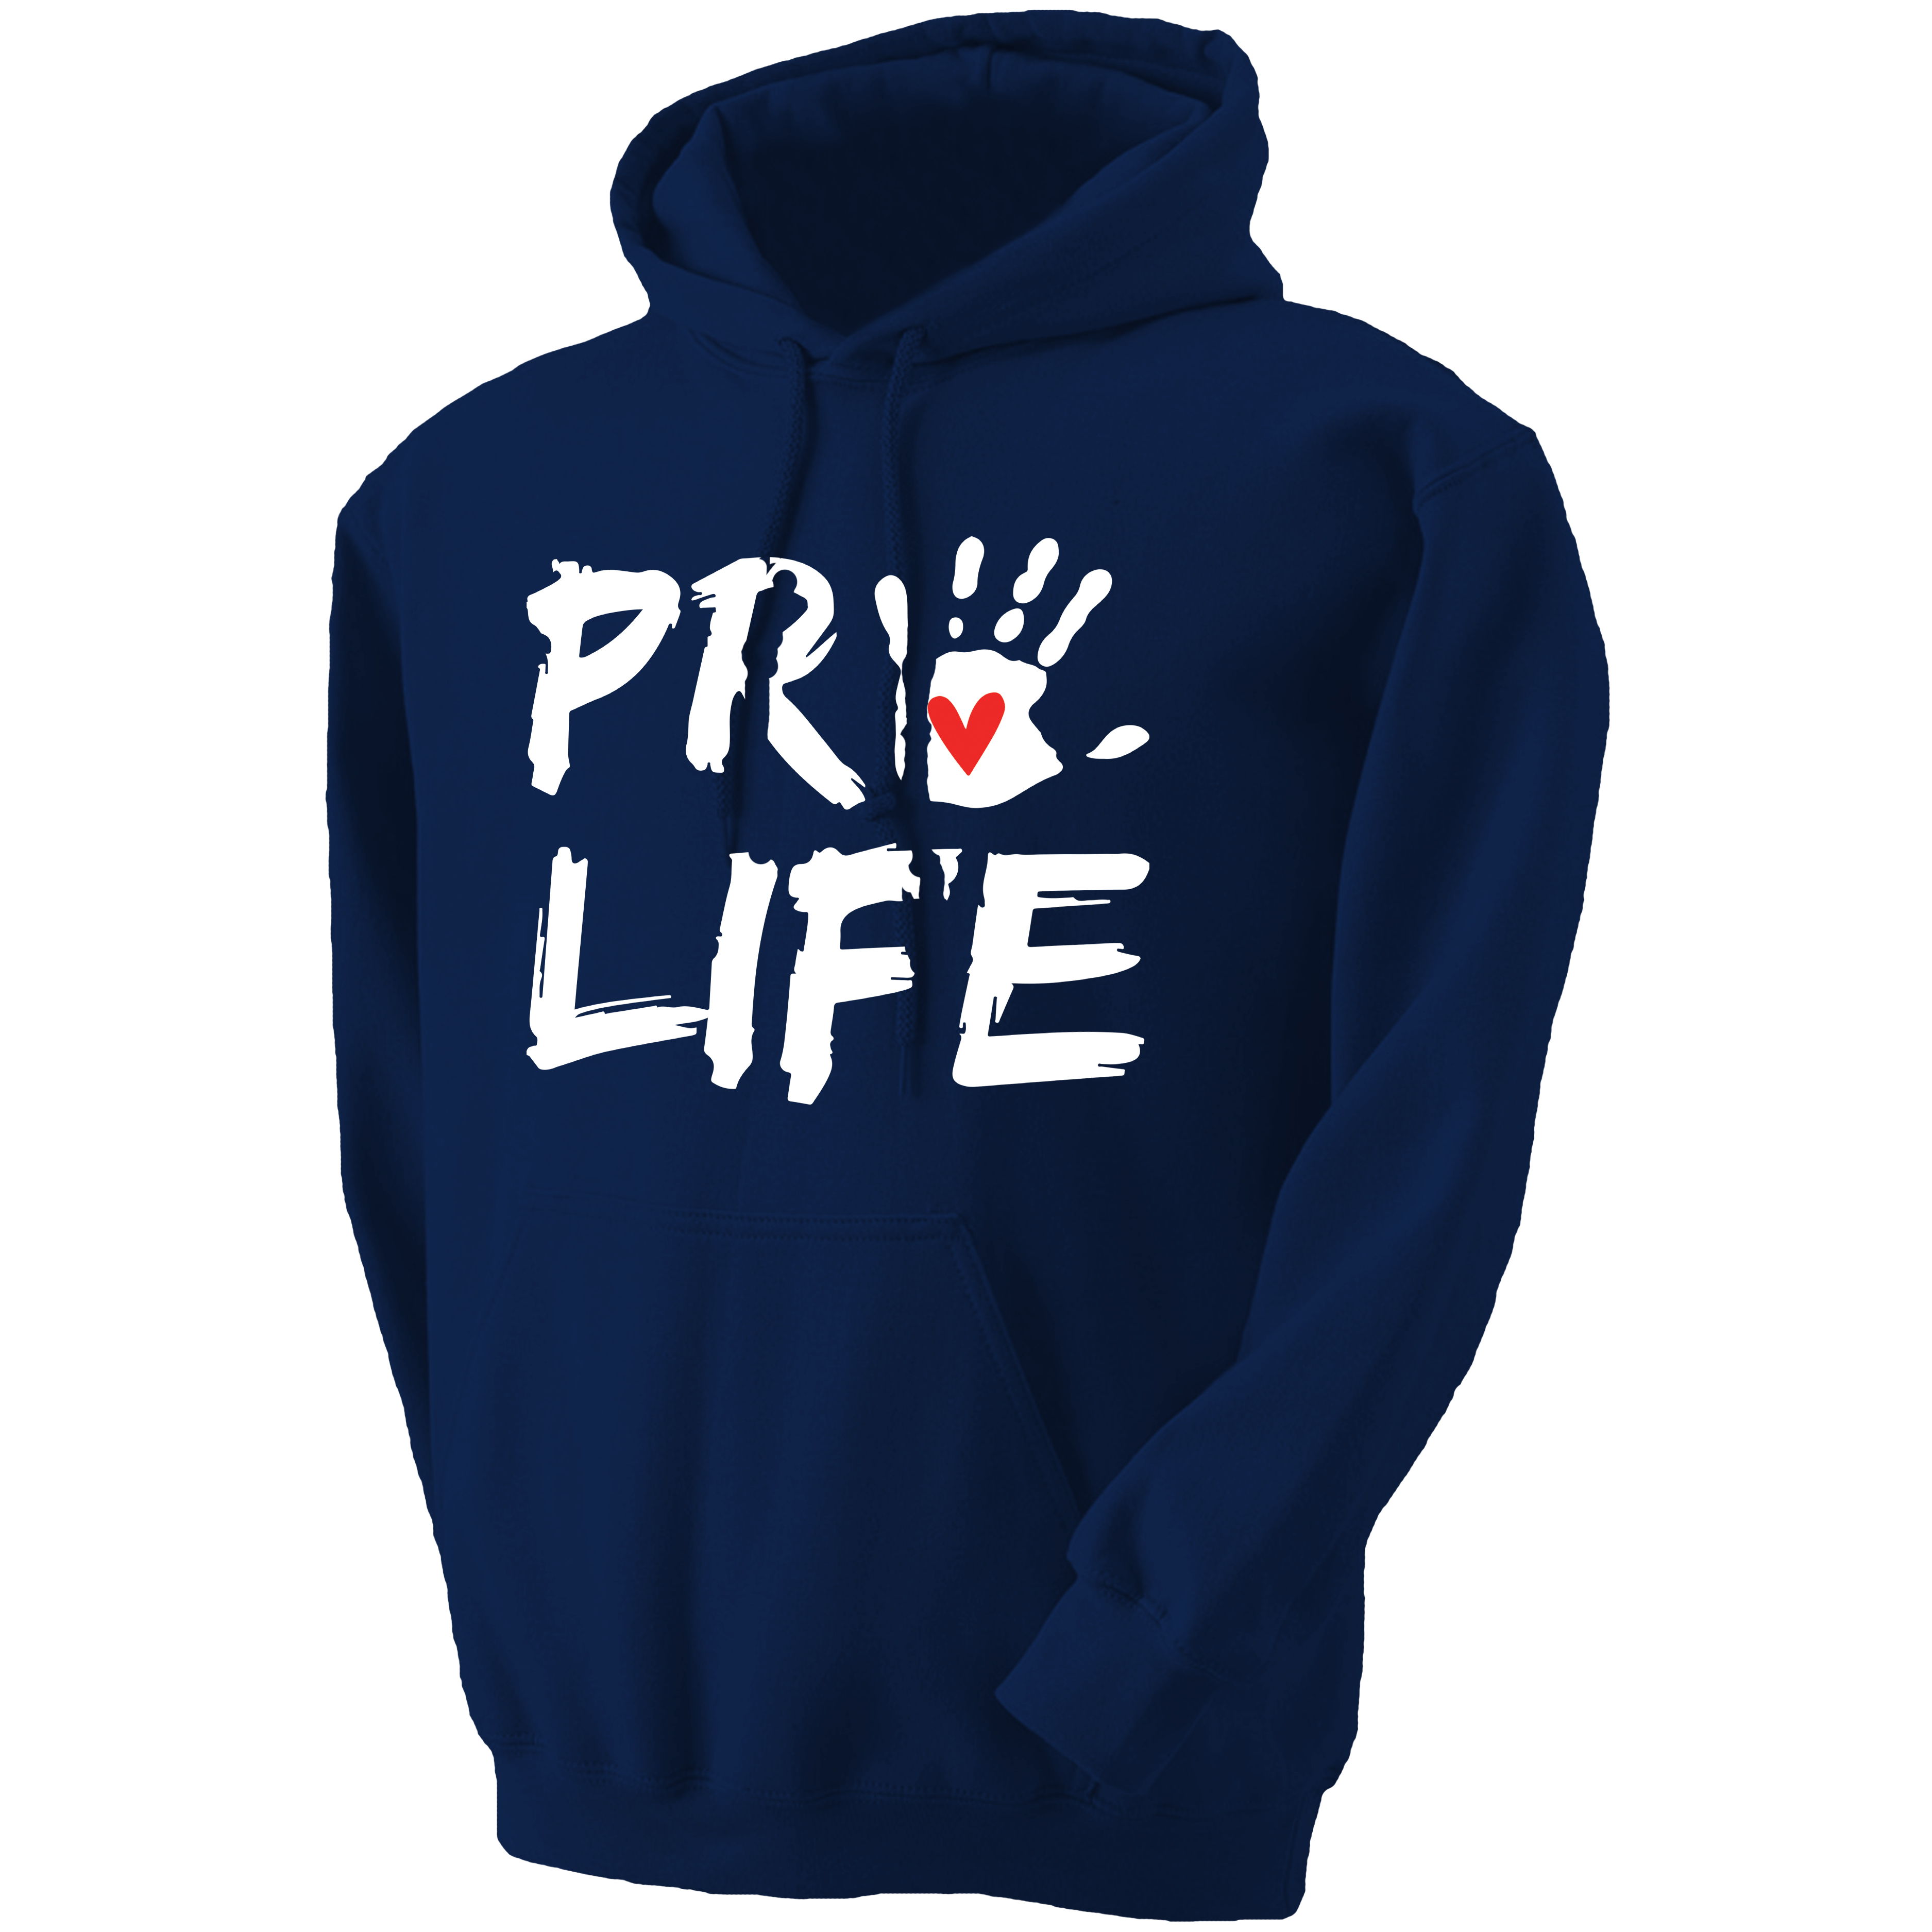 Pro Life with Handprint Hoodie